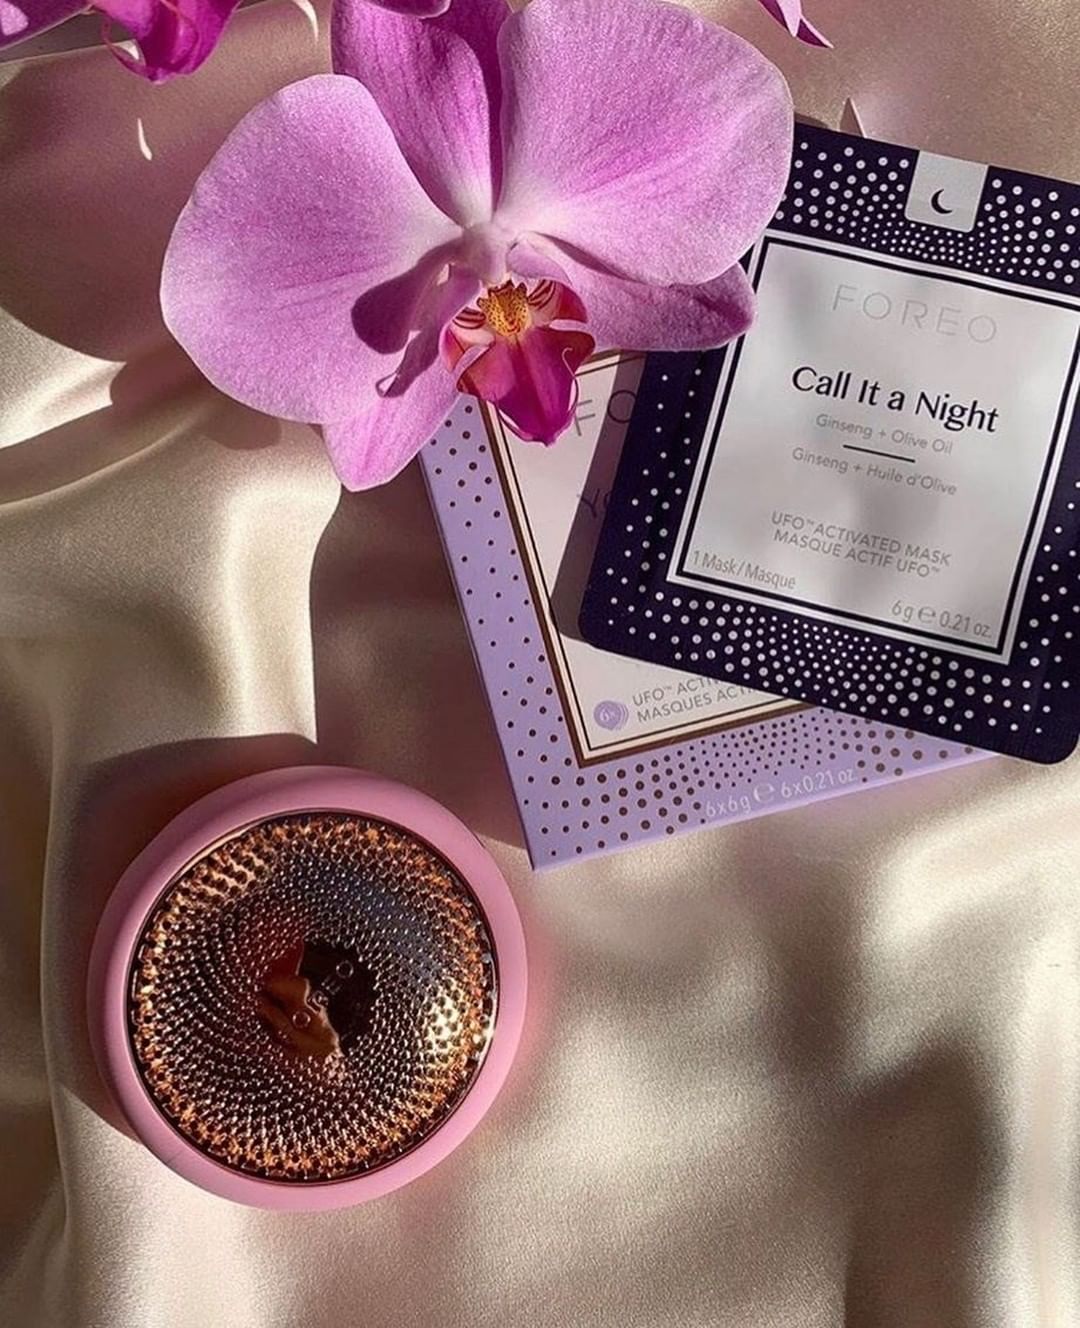 FOREO - Let's end the day right with the UFO + Call it a Night mask 🌸🌙⁣

As the Call it a Night mask is formulated with rich olive oil and rejuvenating ginseng, this deeply nourishing face mask is the...